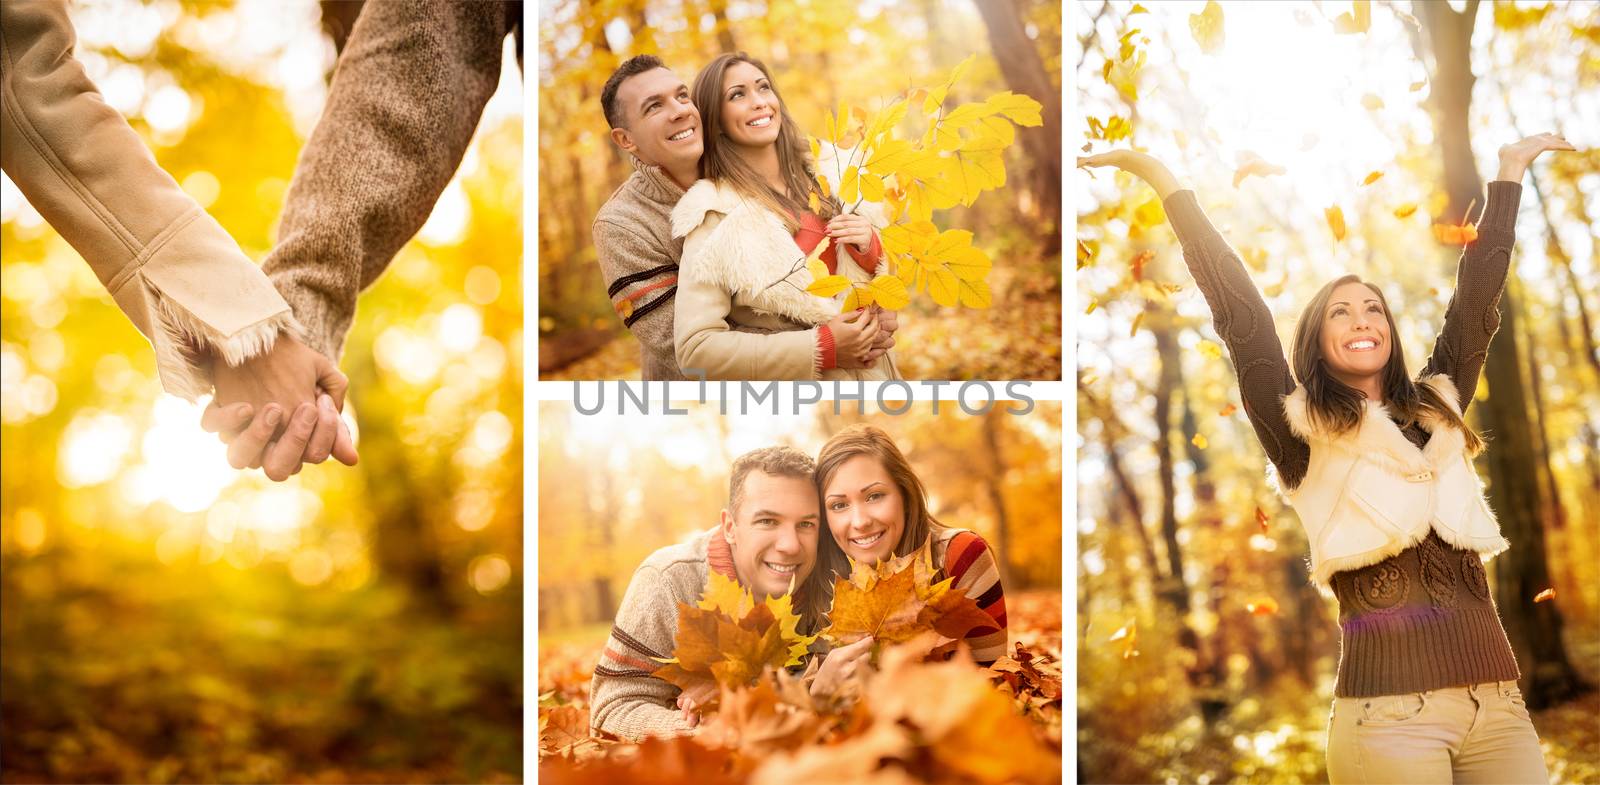 Autumn Collage by MilanMarkovic78